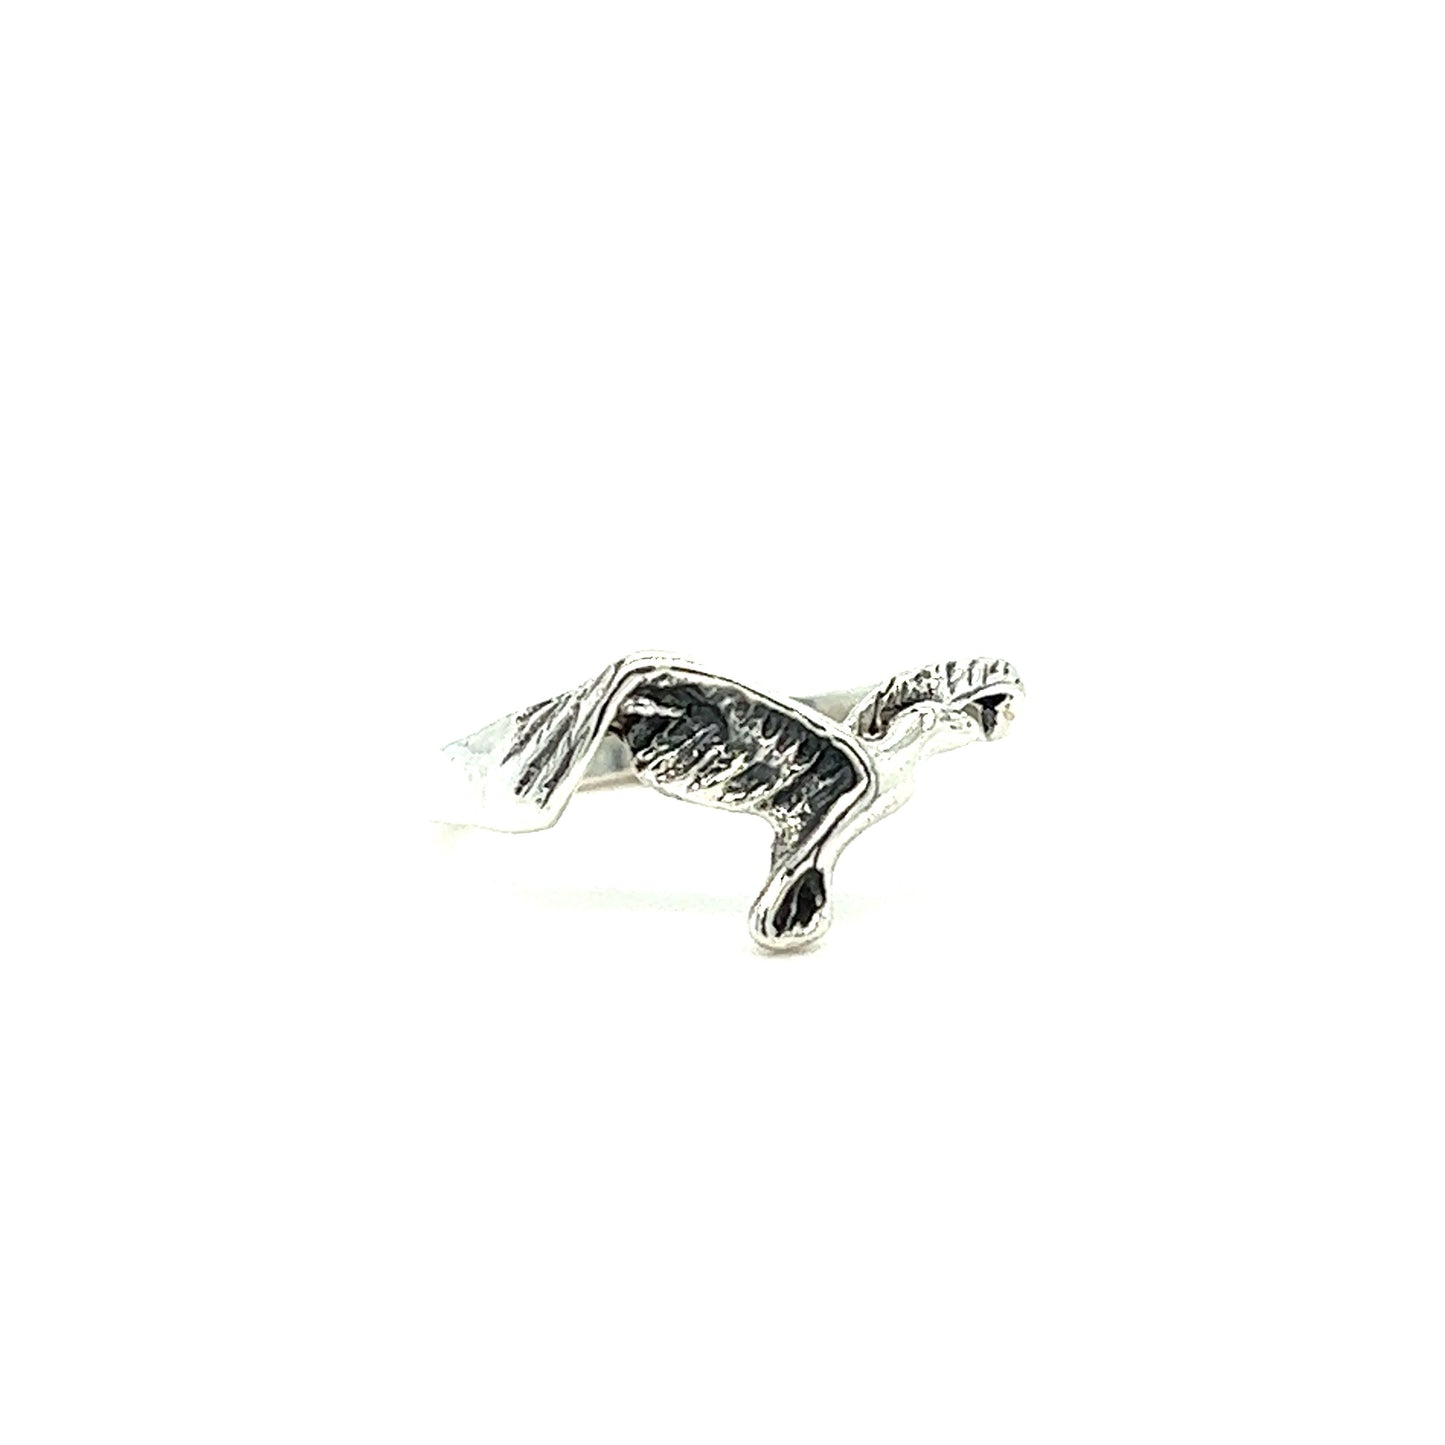 A Dainty Flying Seagull Ring by Super Silver with a horse on it.